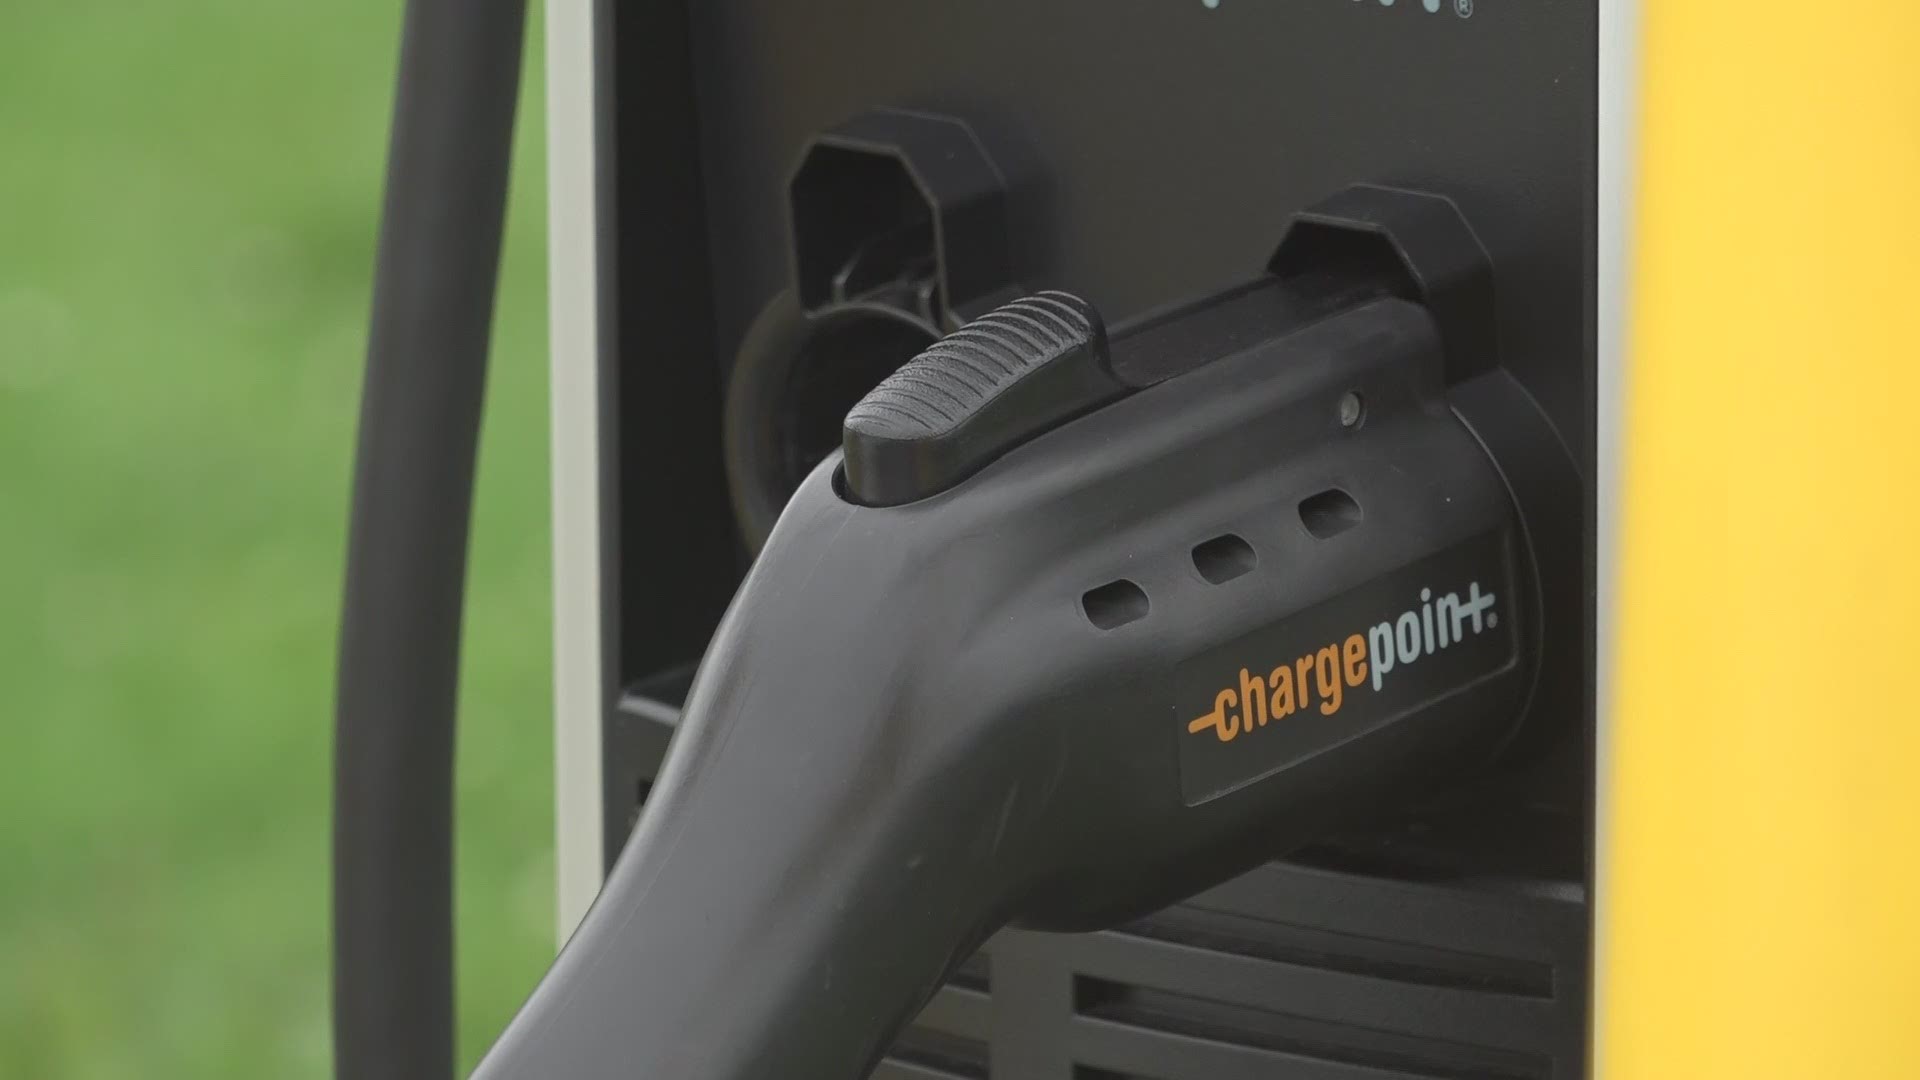 The city of Portland is taking a number of steps to address climate change, including a request for proposals to install more electric vehicle chargers.